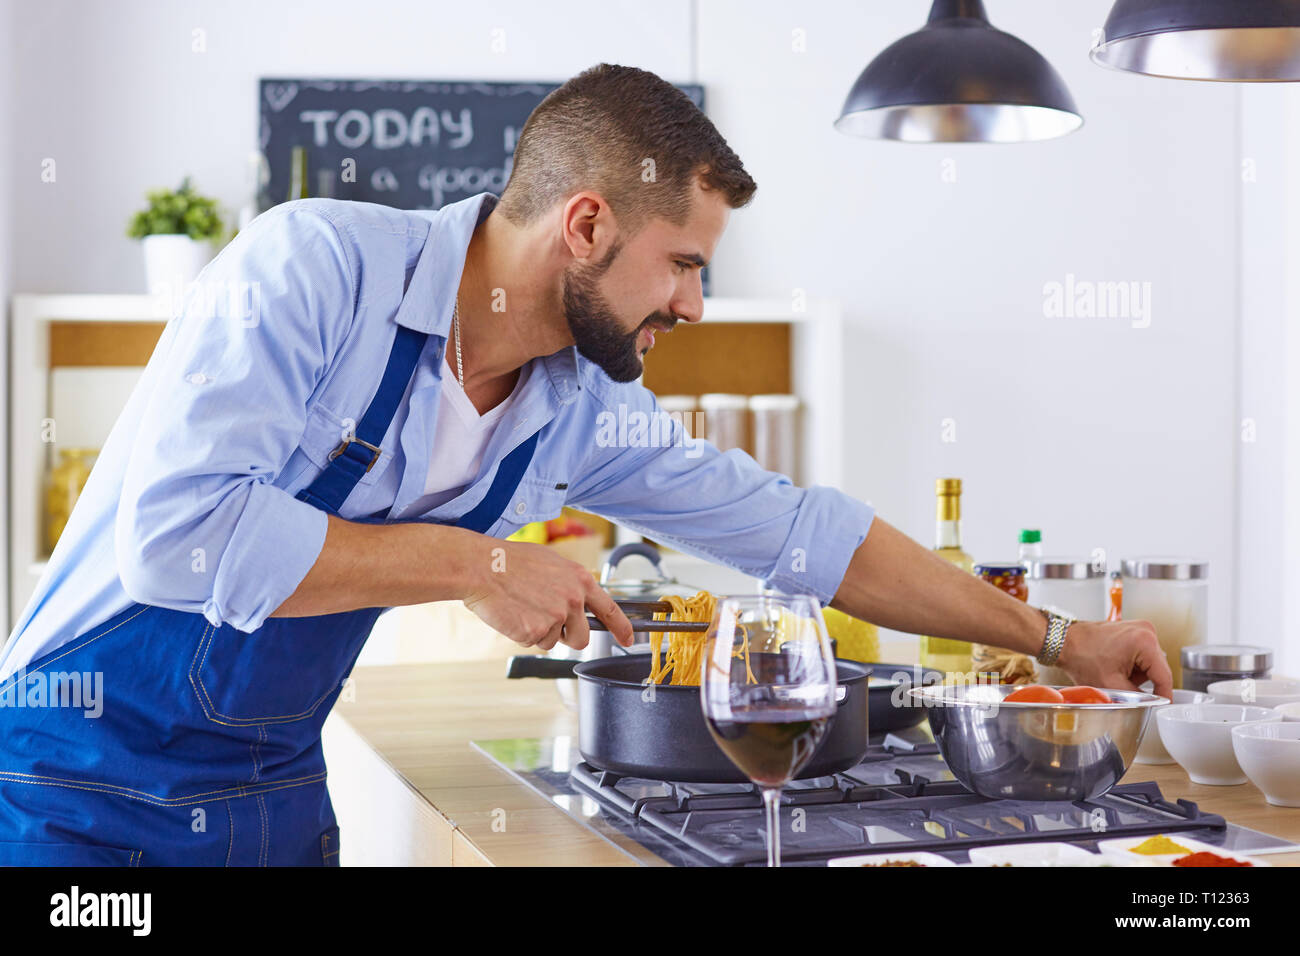 Smiling and confident chef standing in large kitchen Stock Photo